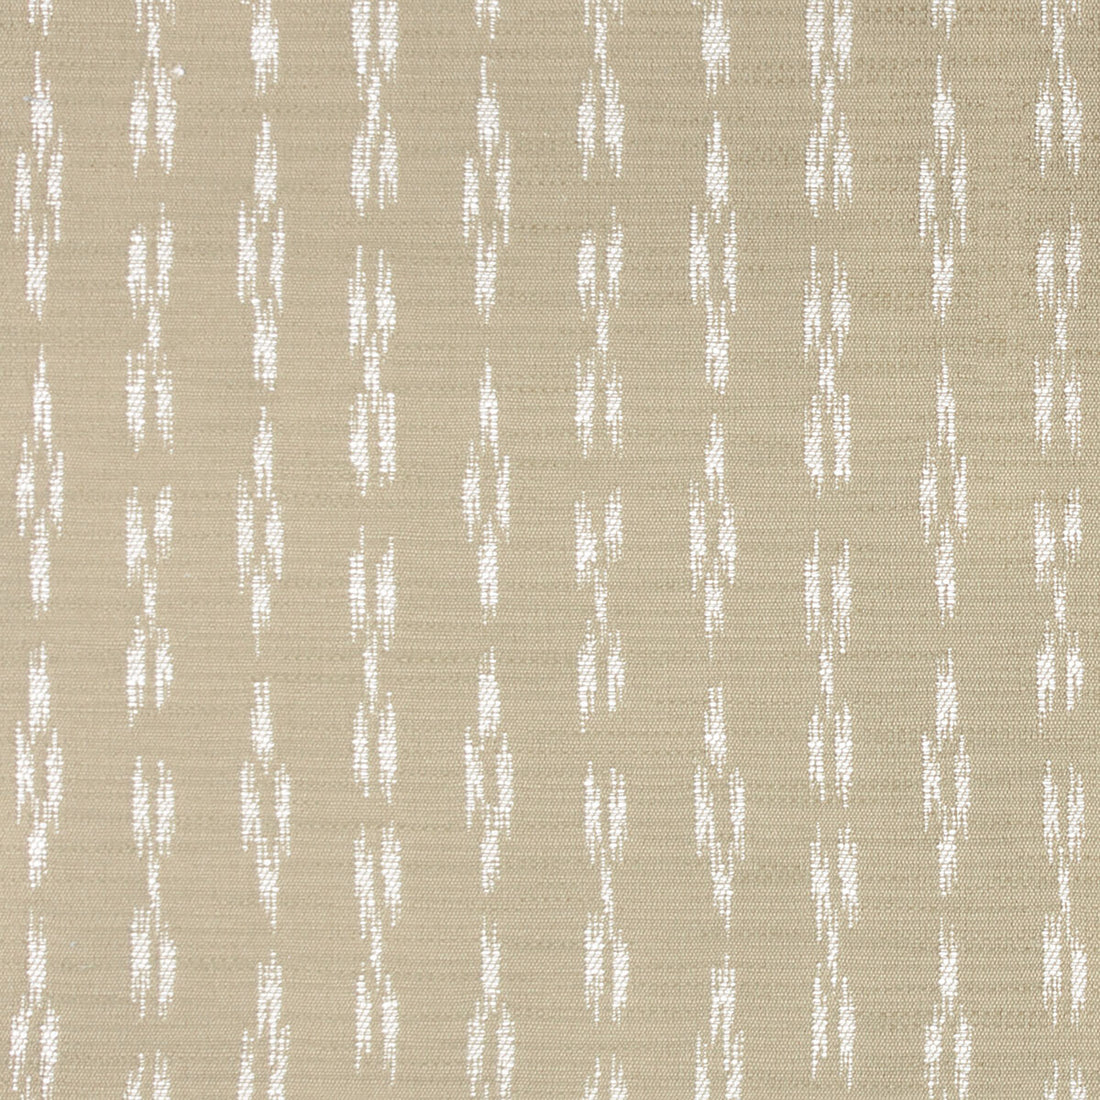 Yoko fabric in crudo color - pattern GDT5647.003.0 - by Gaston y Daniela in the Gaston Japon collection